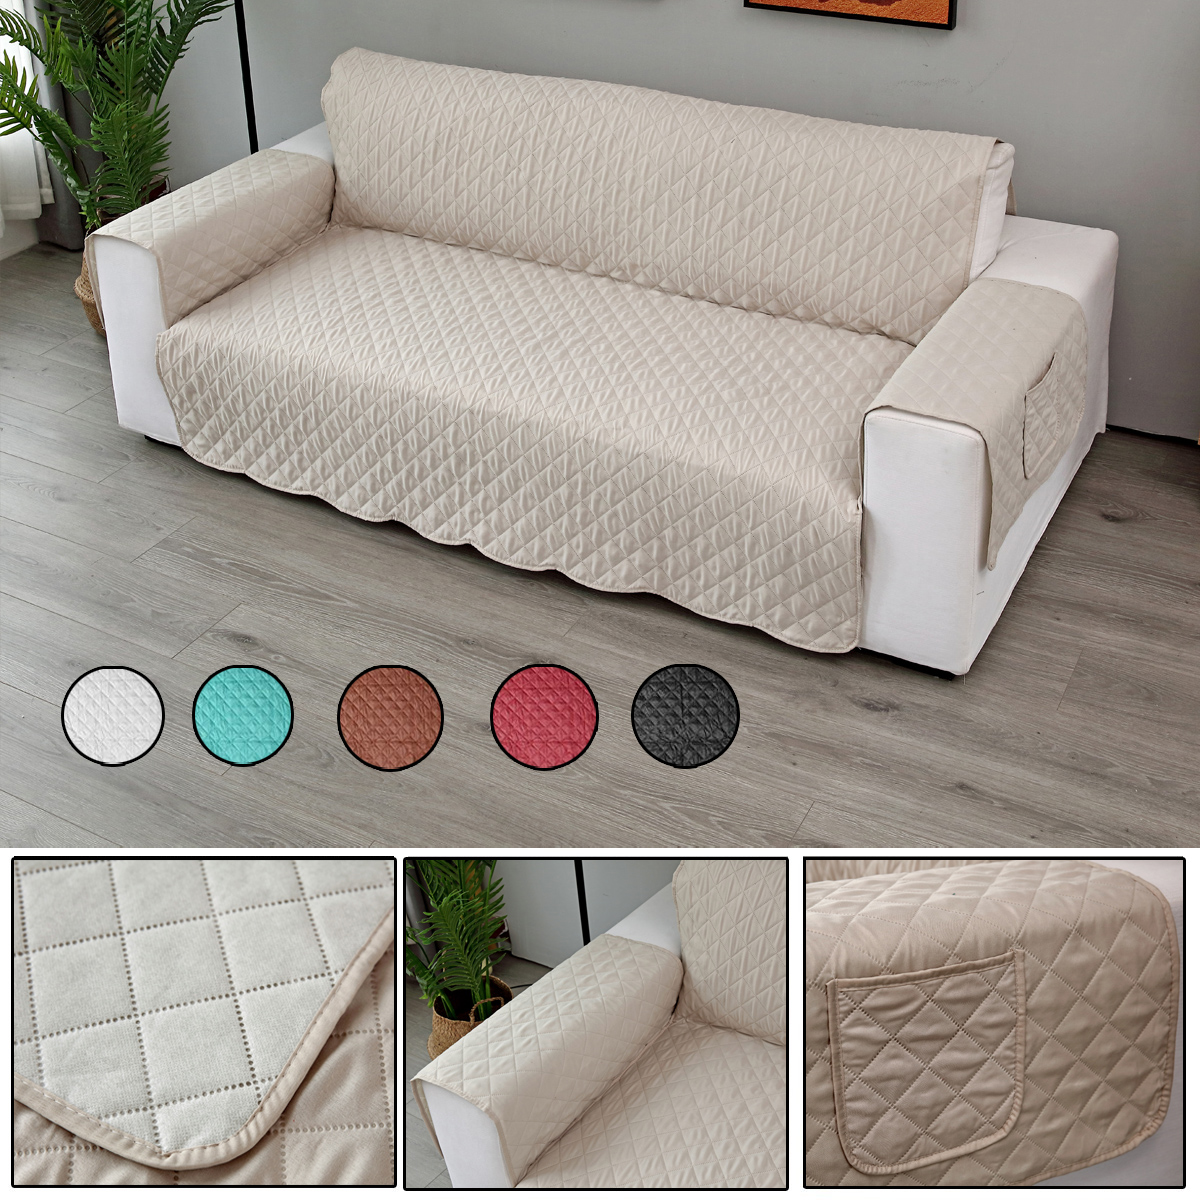 Double-Seats-Sofa-Cover-Living-Room-Home-Decoration-Polyester-Dust-proof-Seat-Covers-1631354-1